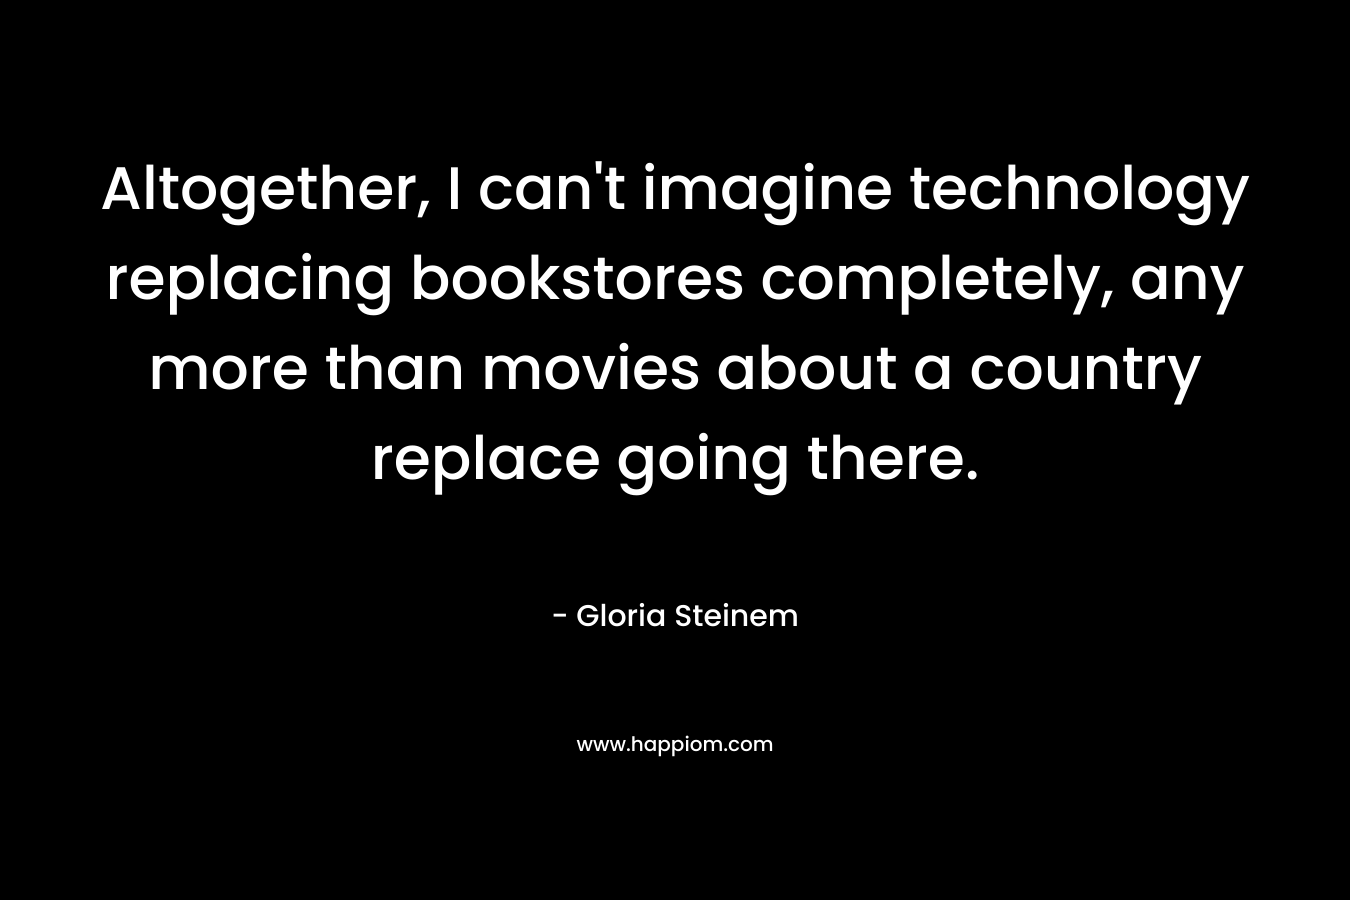 Altogether, I can't imagine technology replacing bookstores completely, any more than movies about a country replace going there.